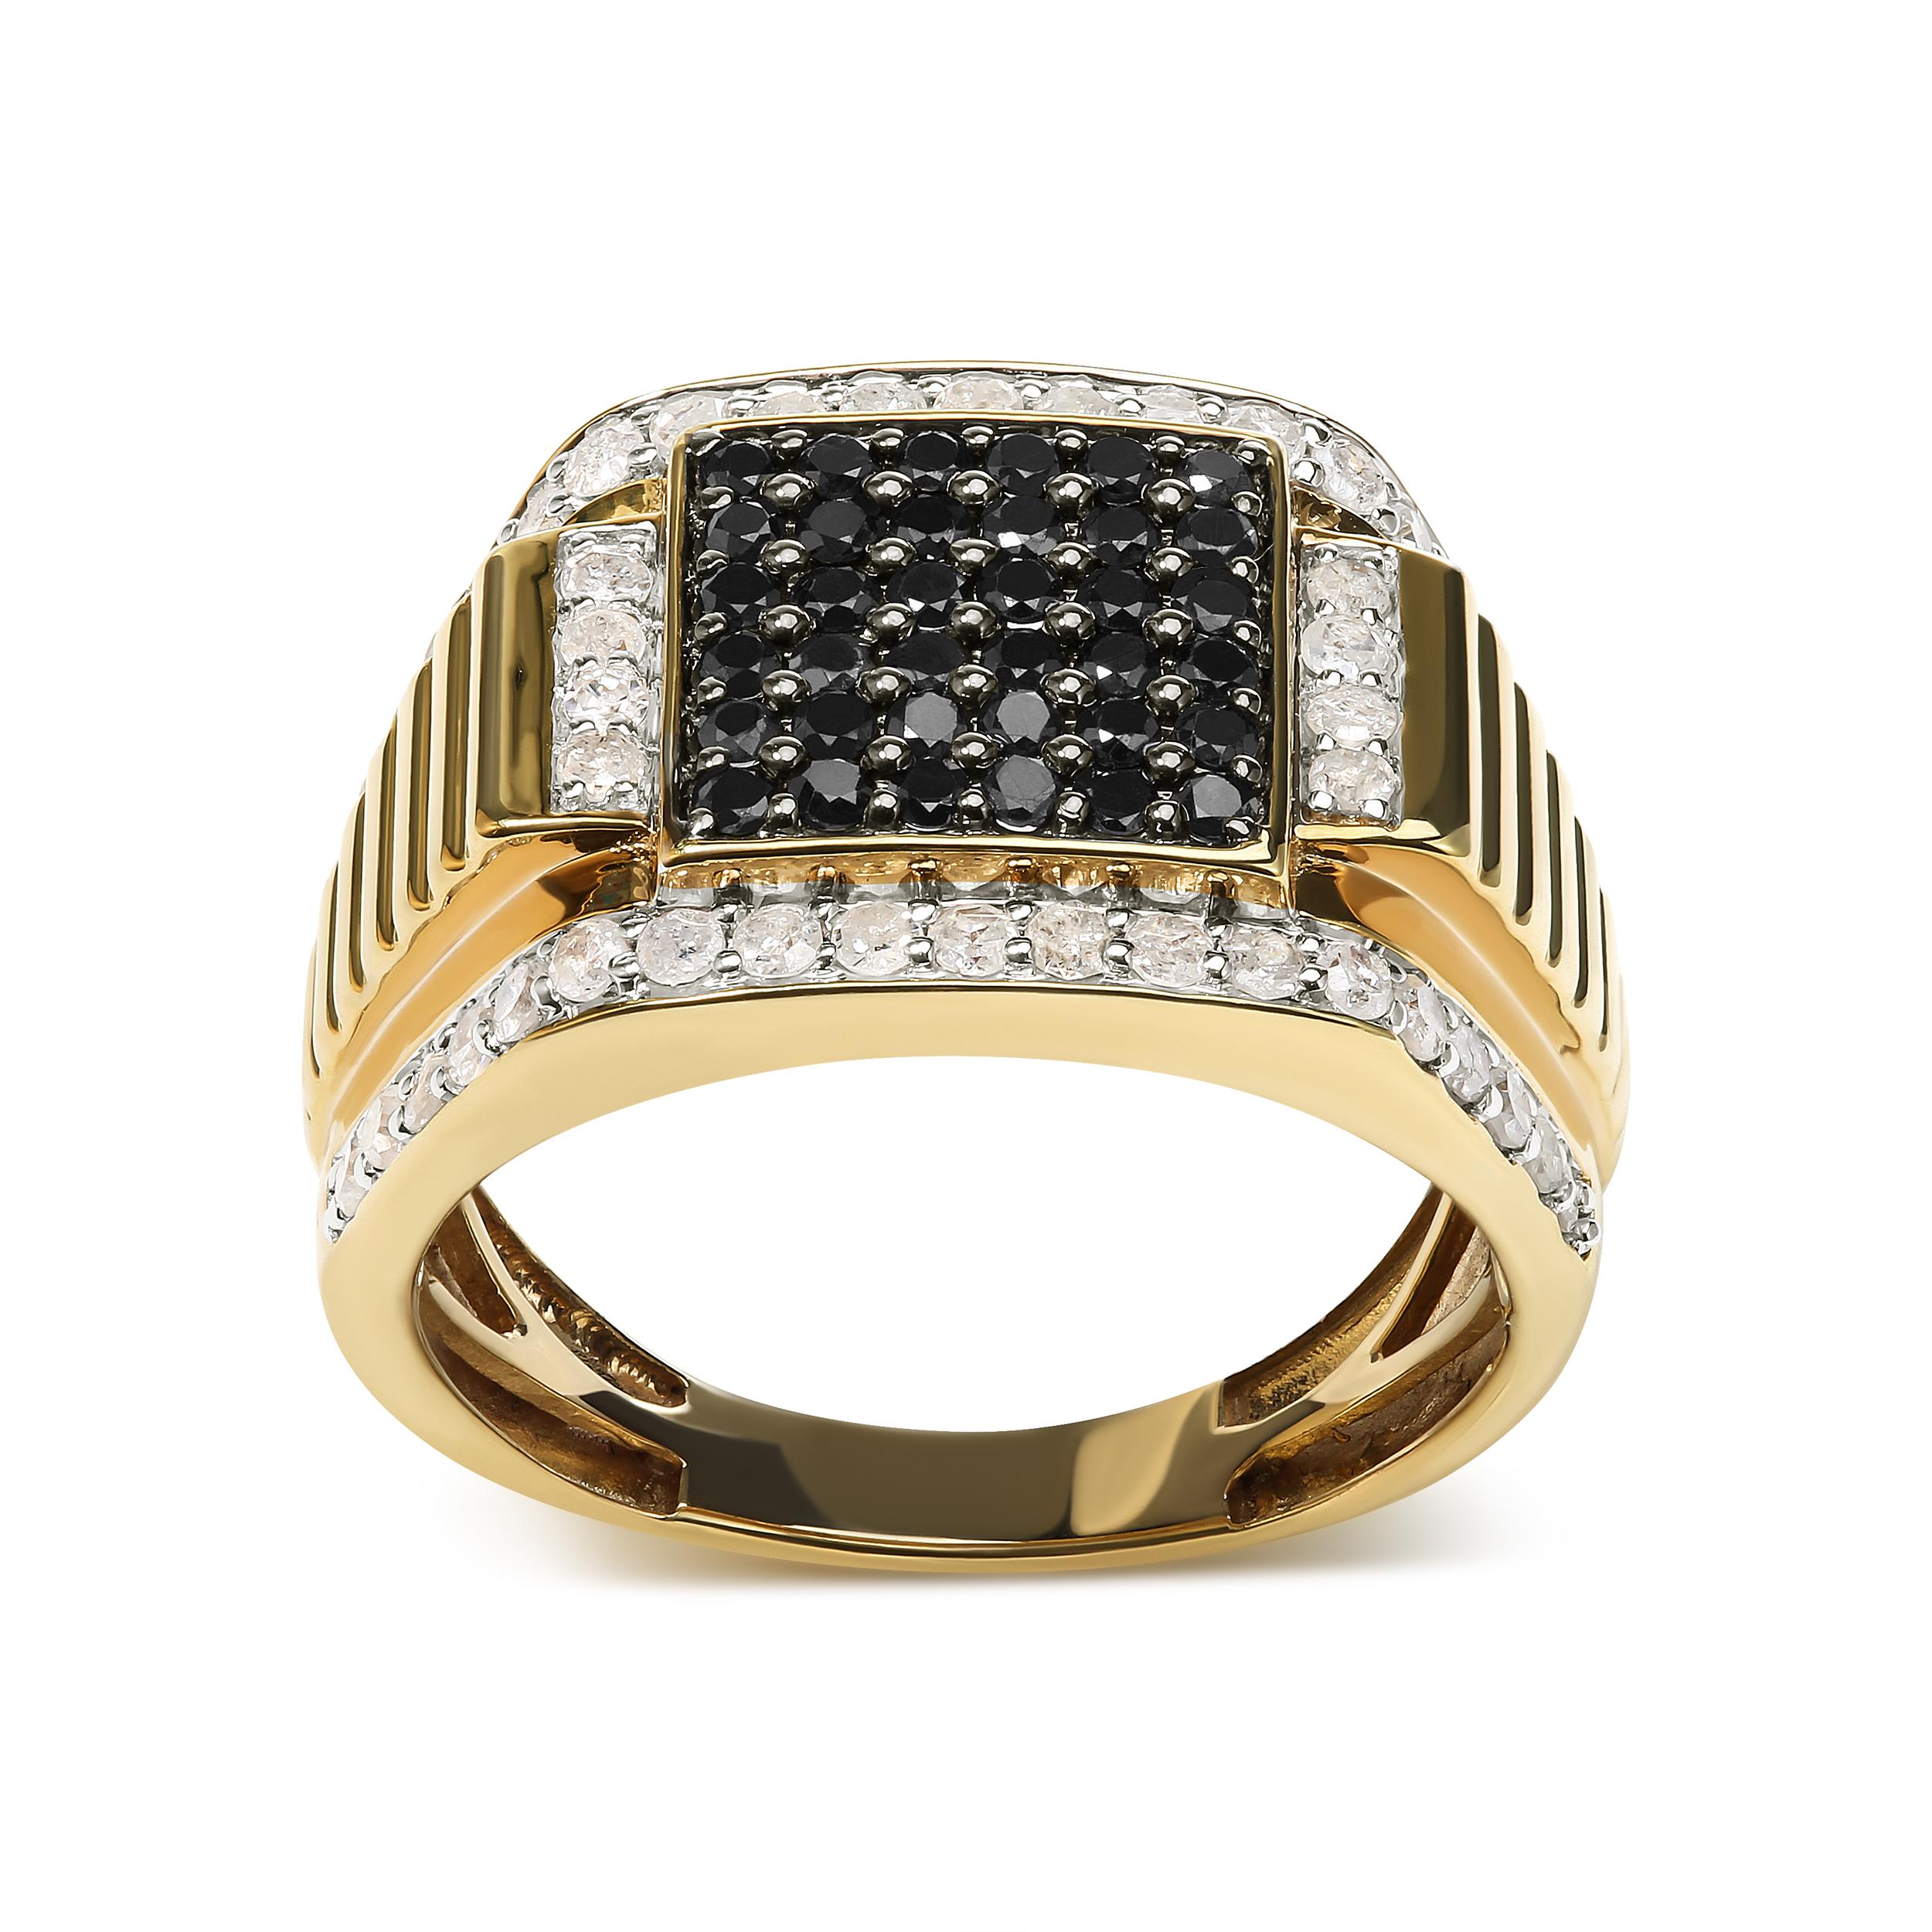 For Sale:  Men's 10K Yellow Gold 1 1/2 Carat White and Black Treated Diamond Cluster Ring 2